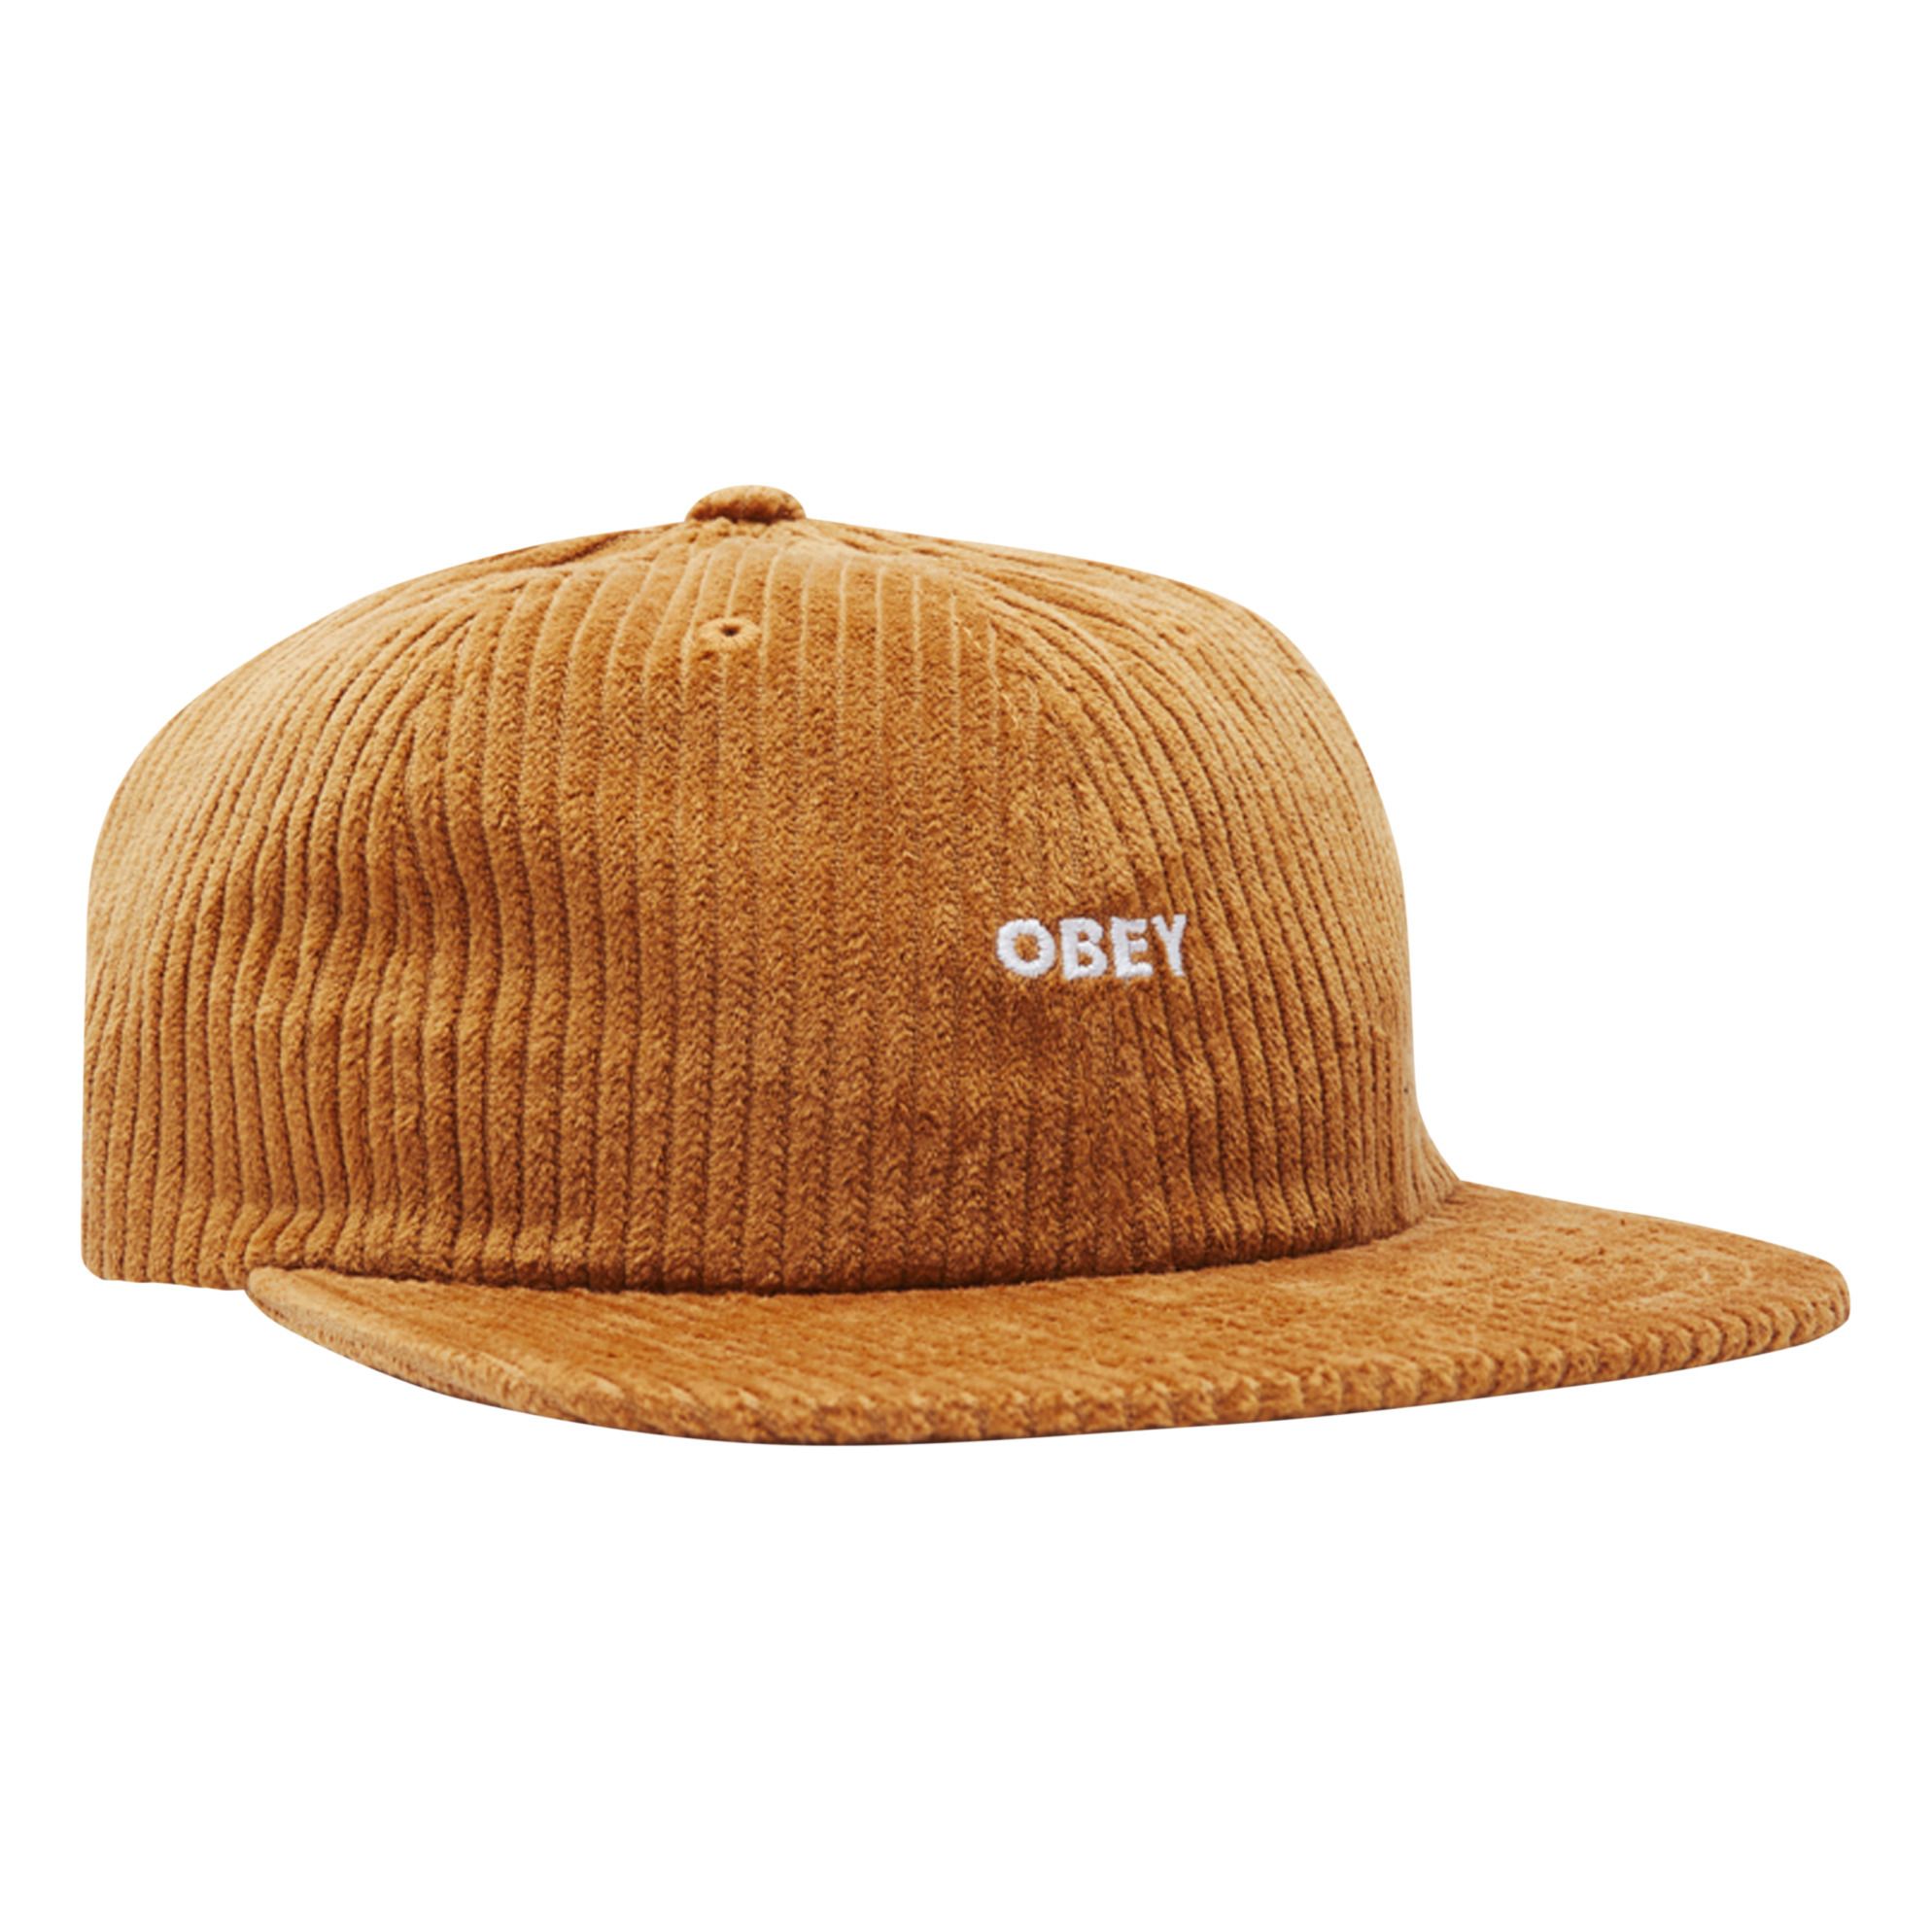 Obey - Casquette - Homme - Camel